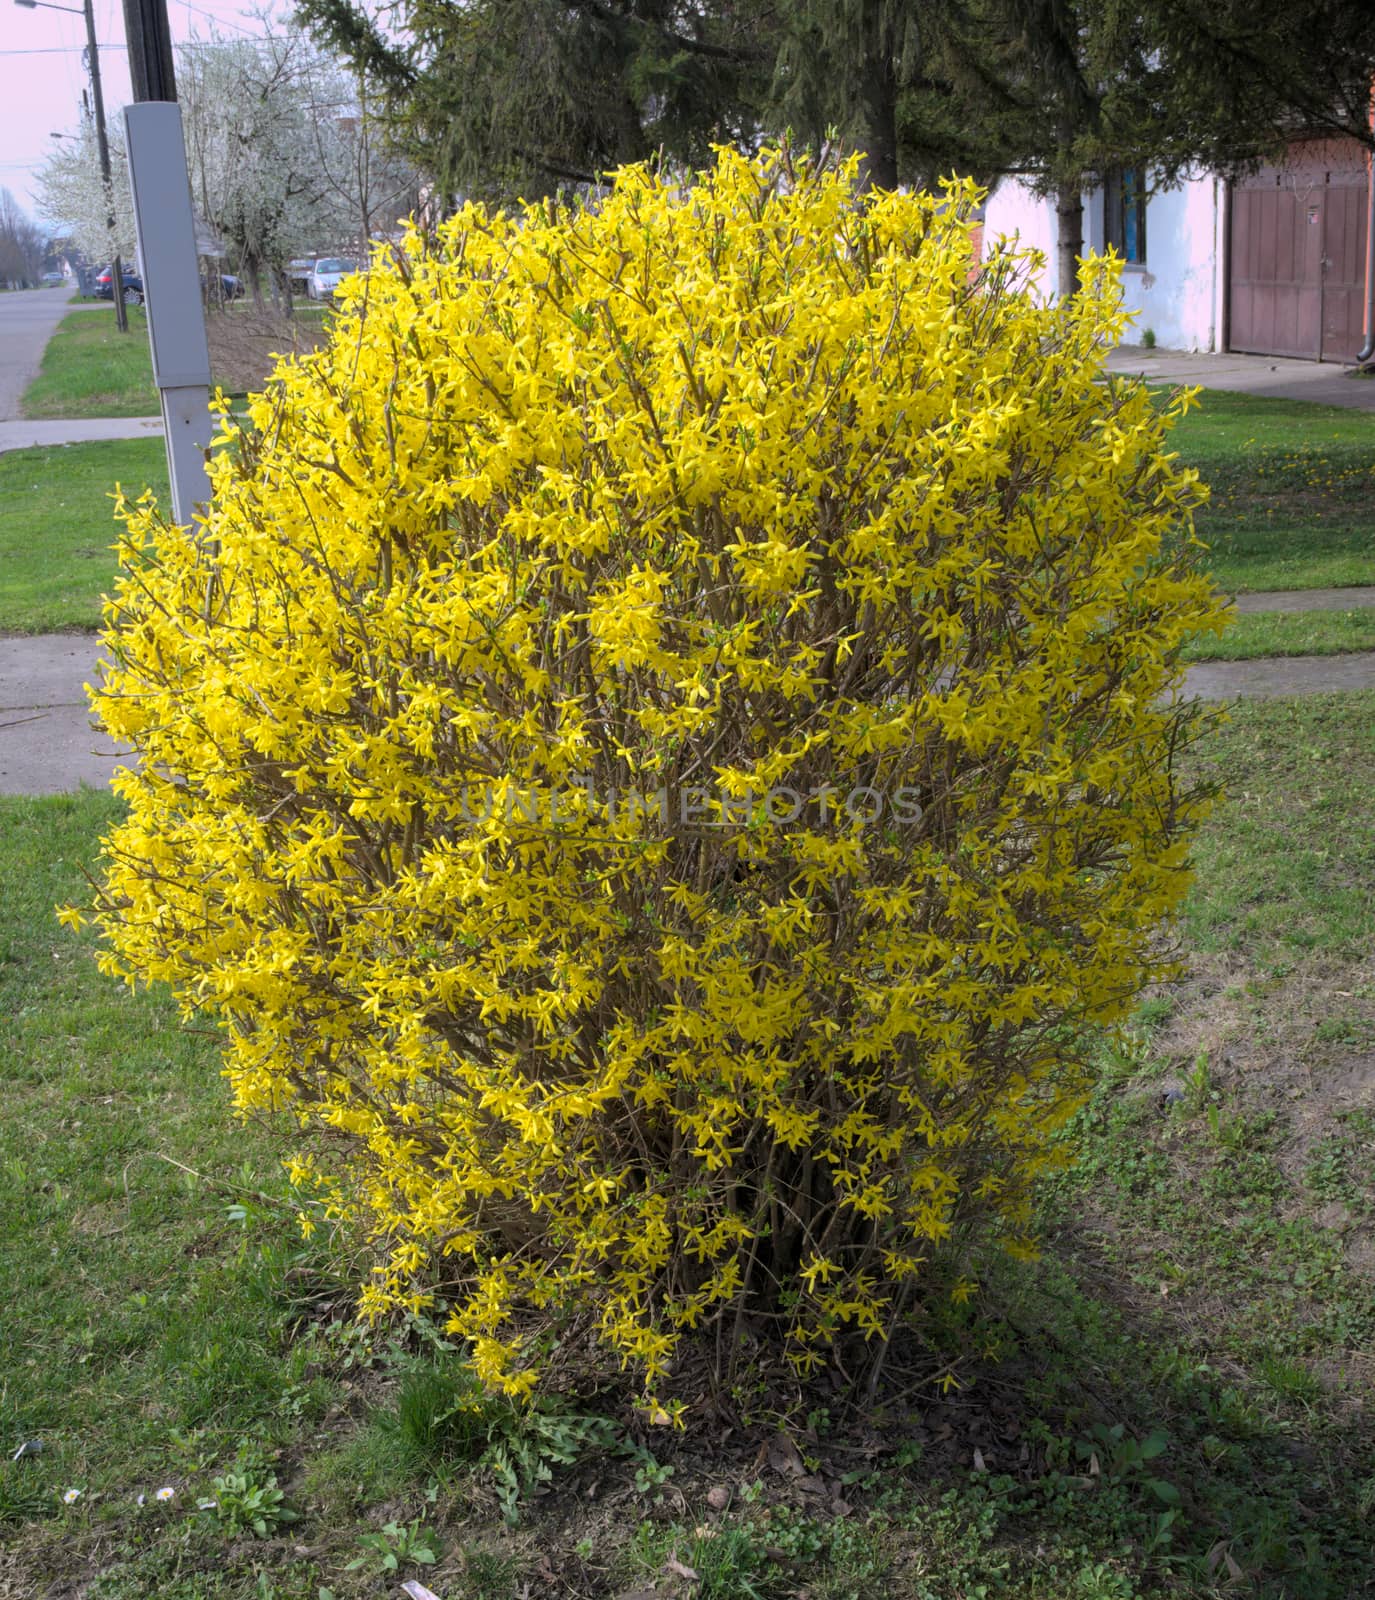 Bush blooming with yellow flowers at spring time by sheriffkule